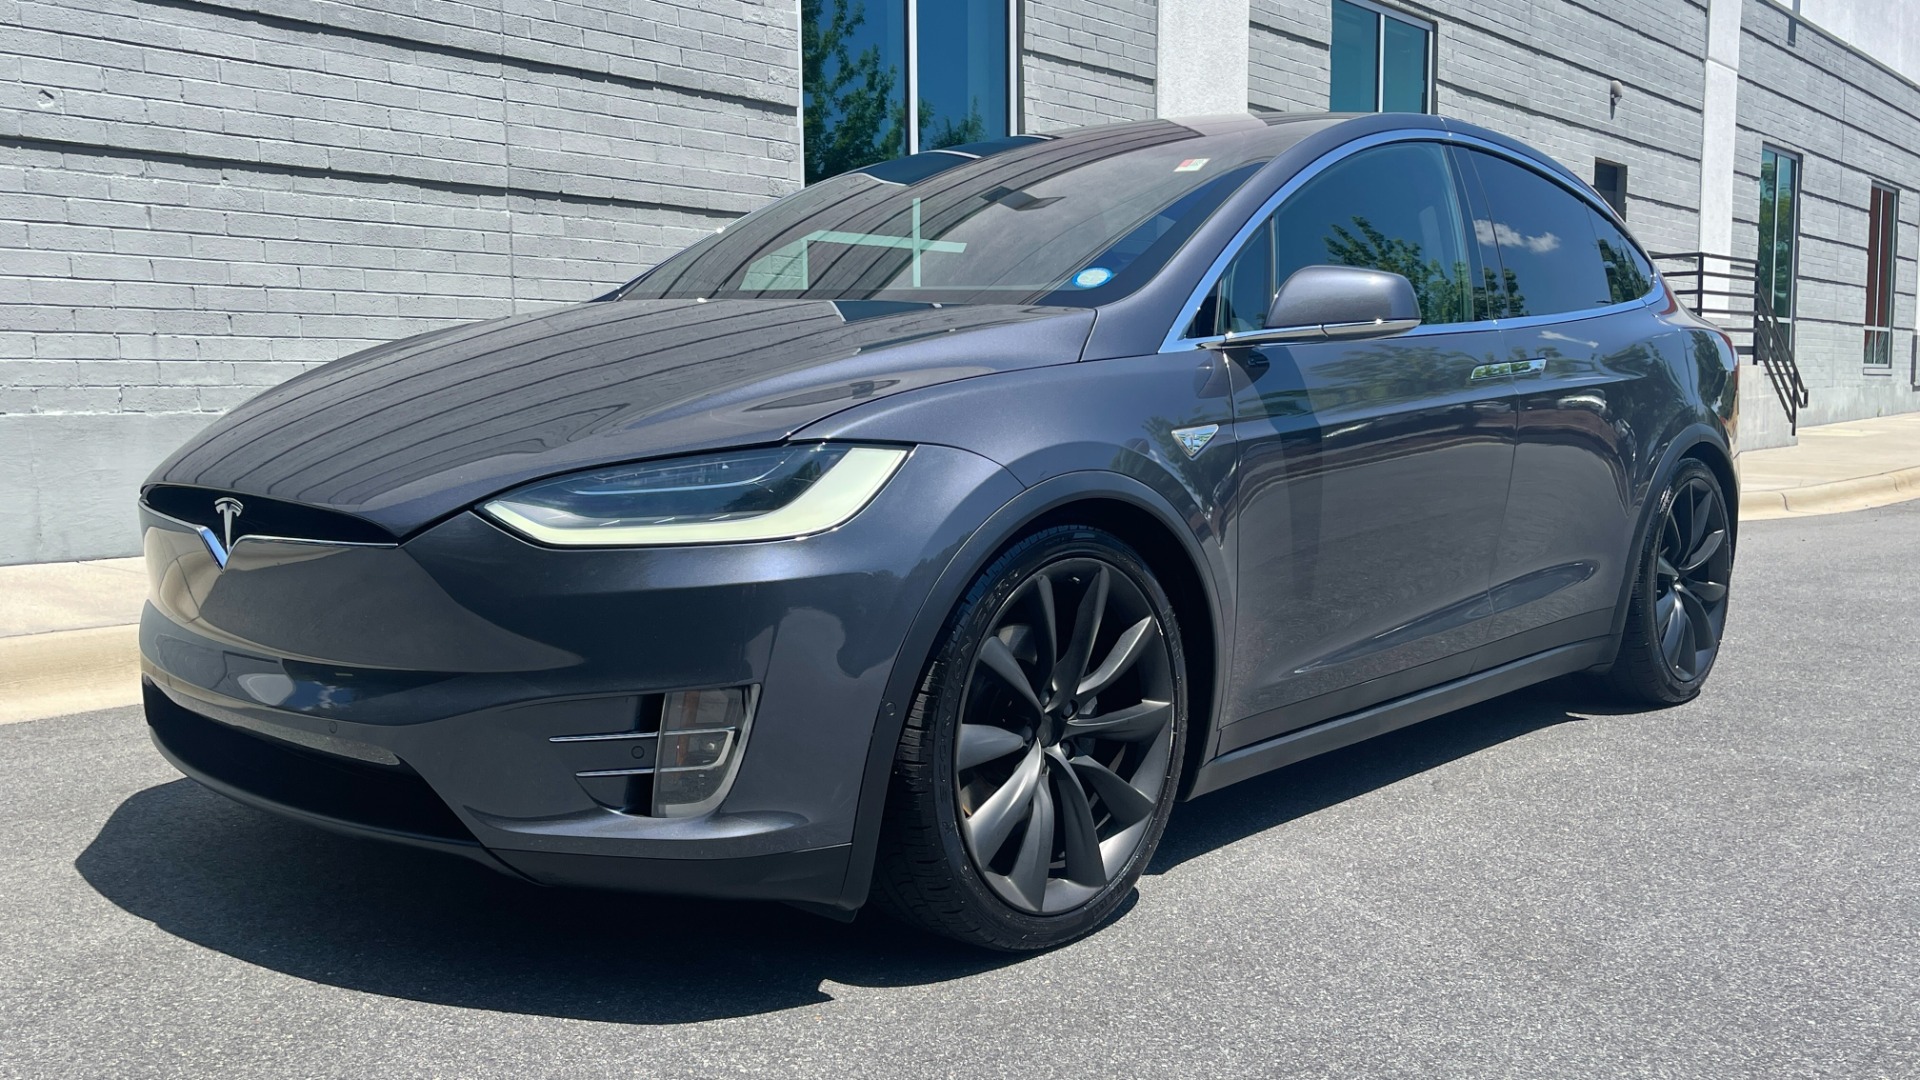 Used 2016 Tesla Model X 90D / AUTOPILOT / 3RD ROW / FALCON DOORS / ADJUSTABLE SUSPENSION for sale $62,995 at Formula Imports in Charlotte NC 28227 9